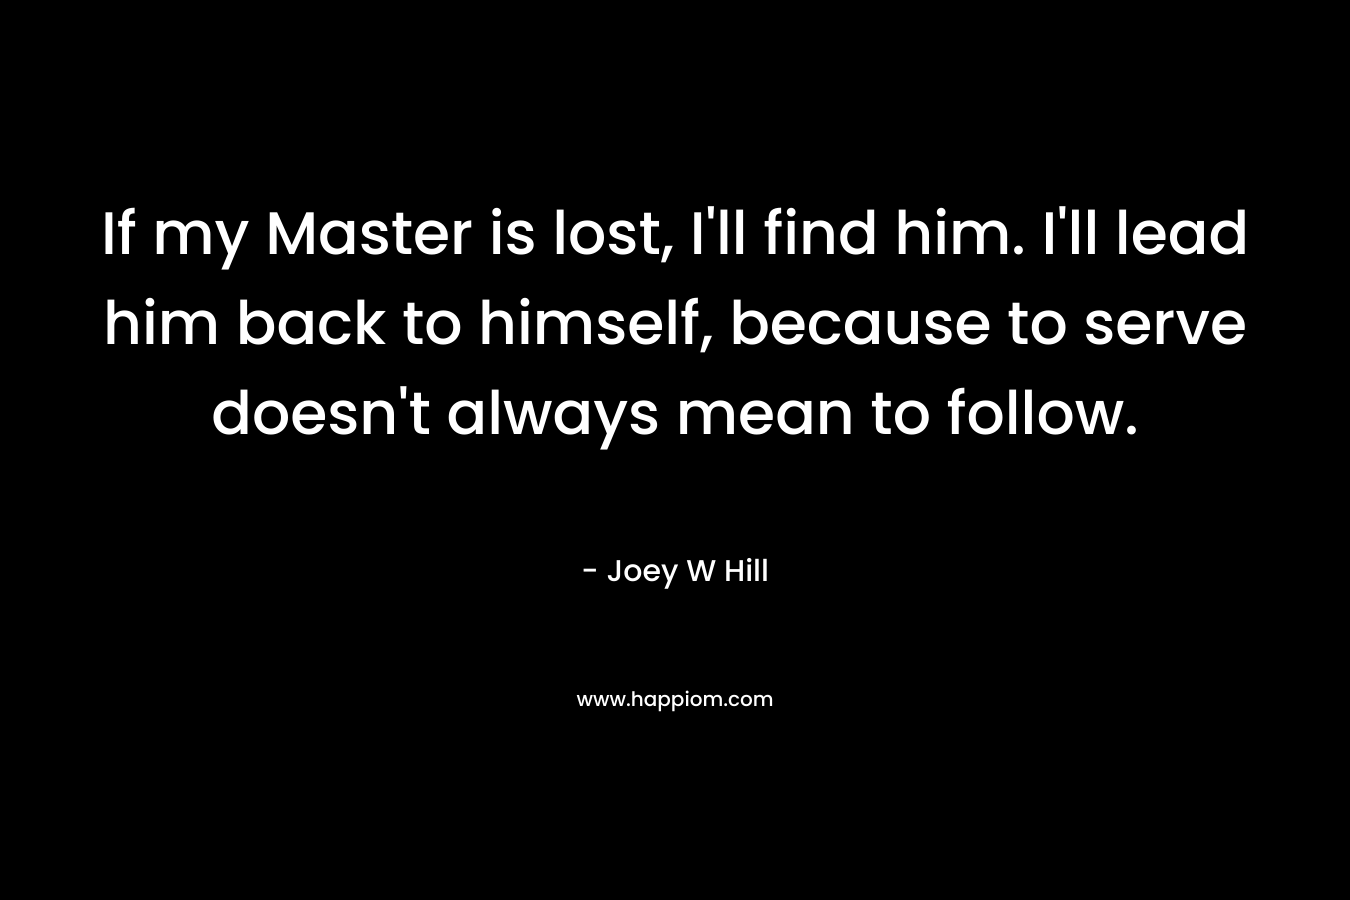 If my Master is lost, I'll find him. I'll lead him back to himself, because to serve doesn't always mean to follow.